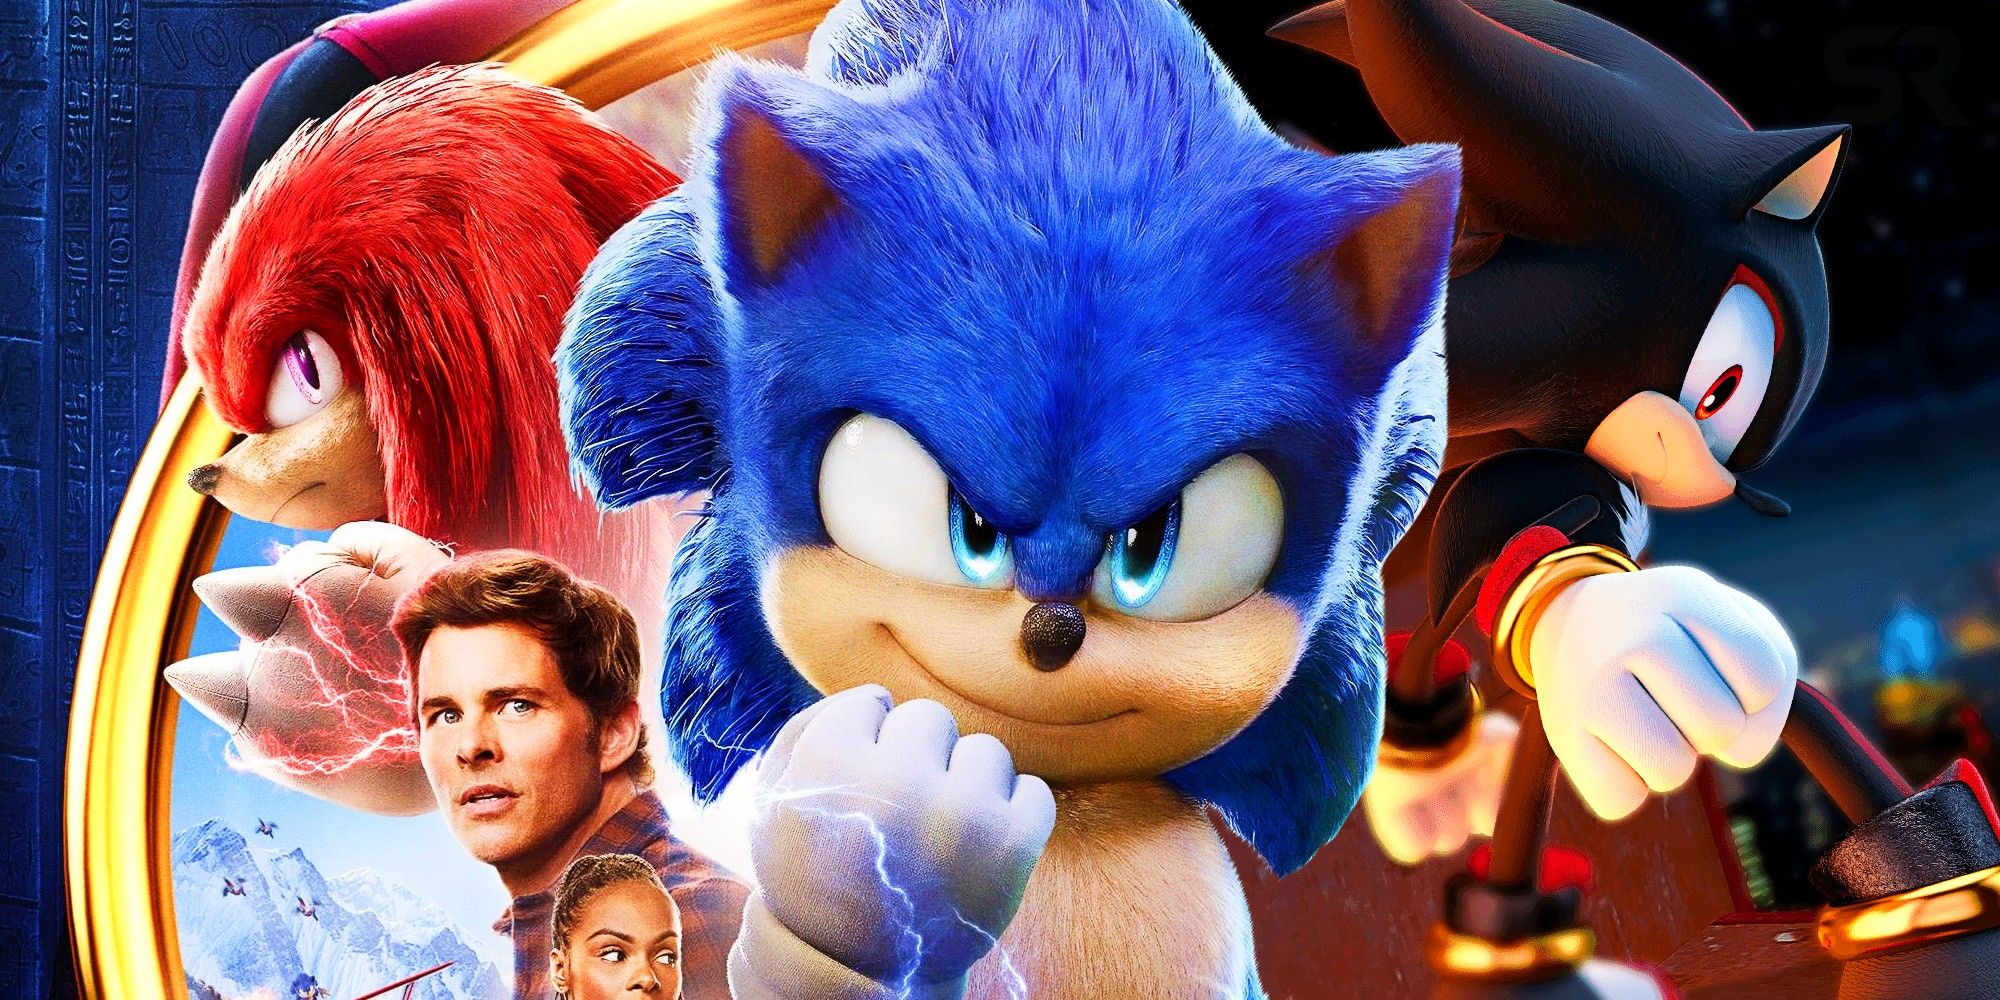  Sonic the Hedgehog 2 : Unknown: Movies & TV